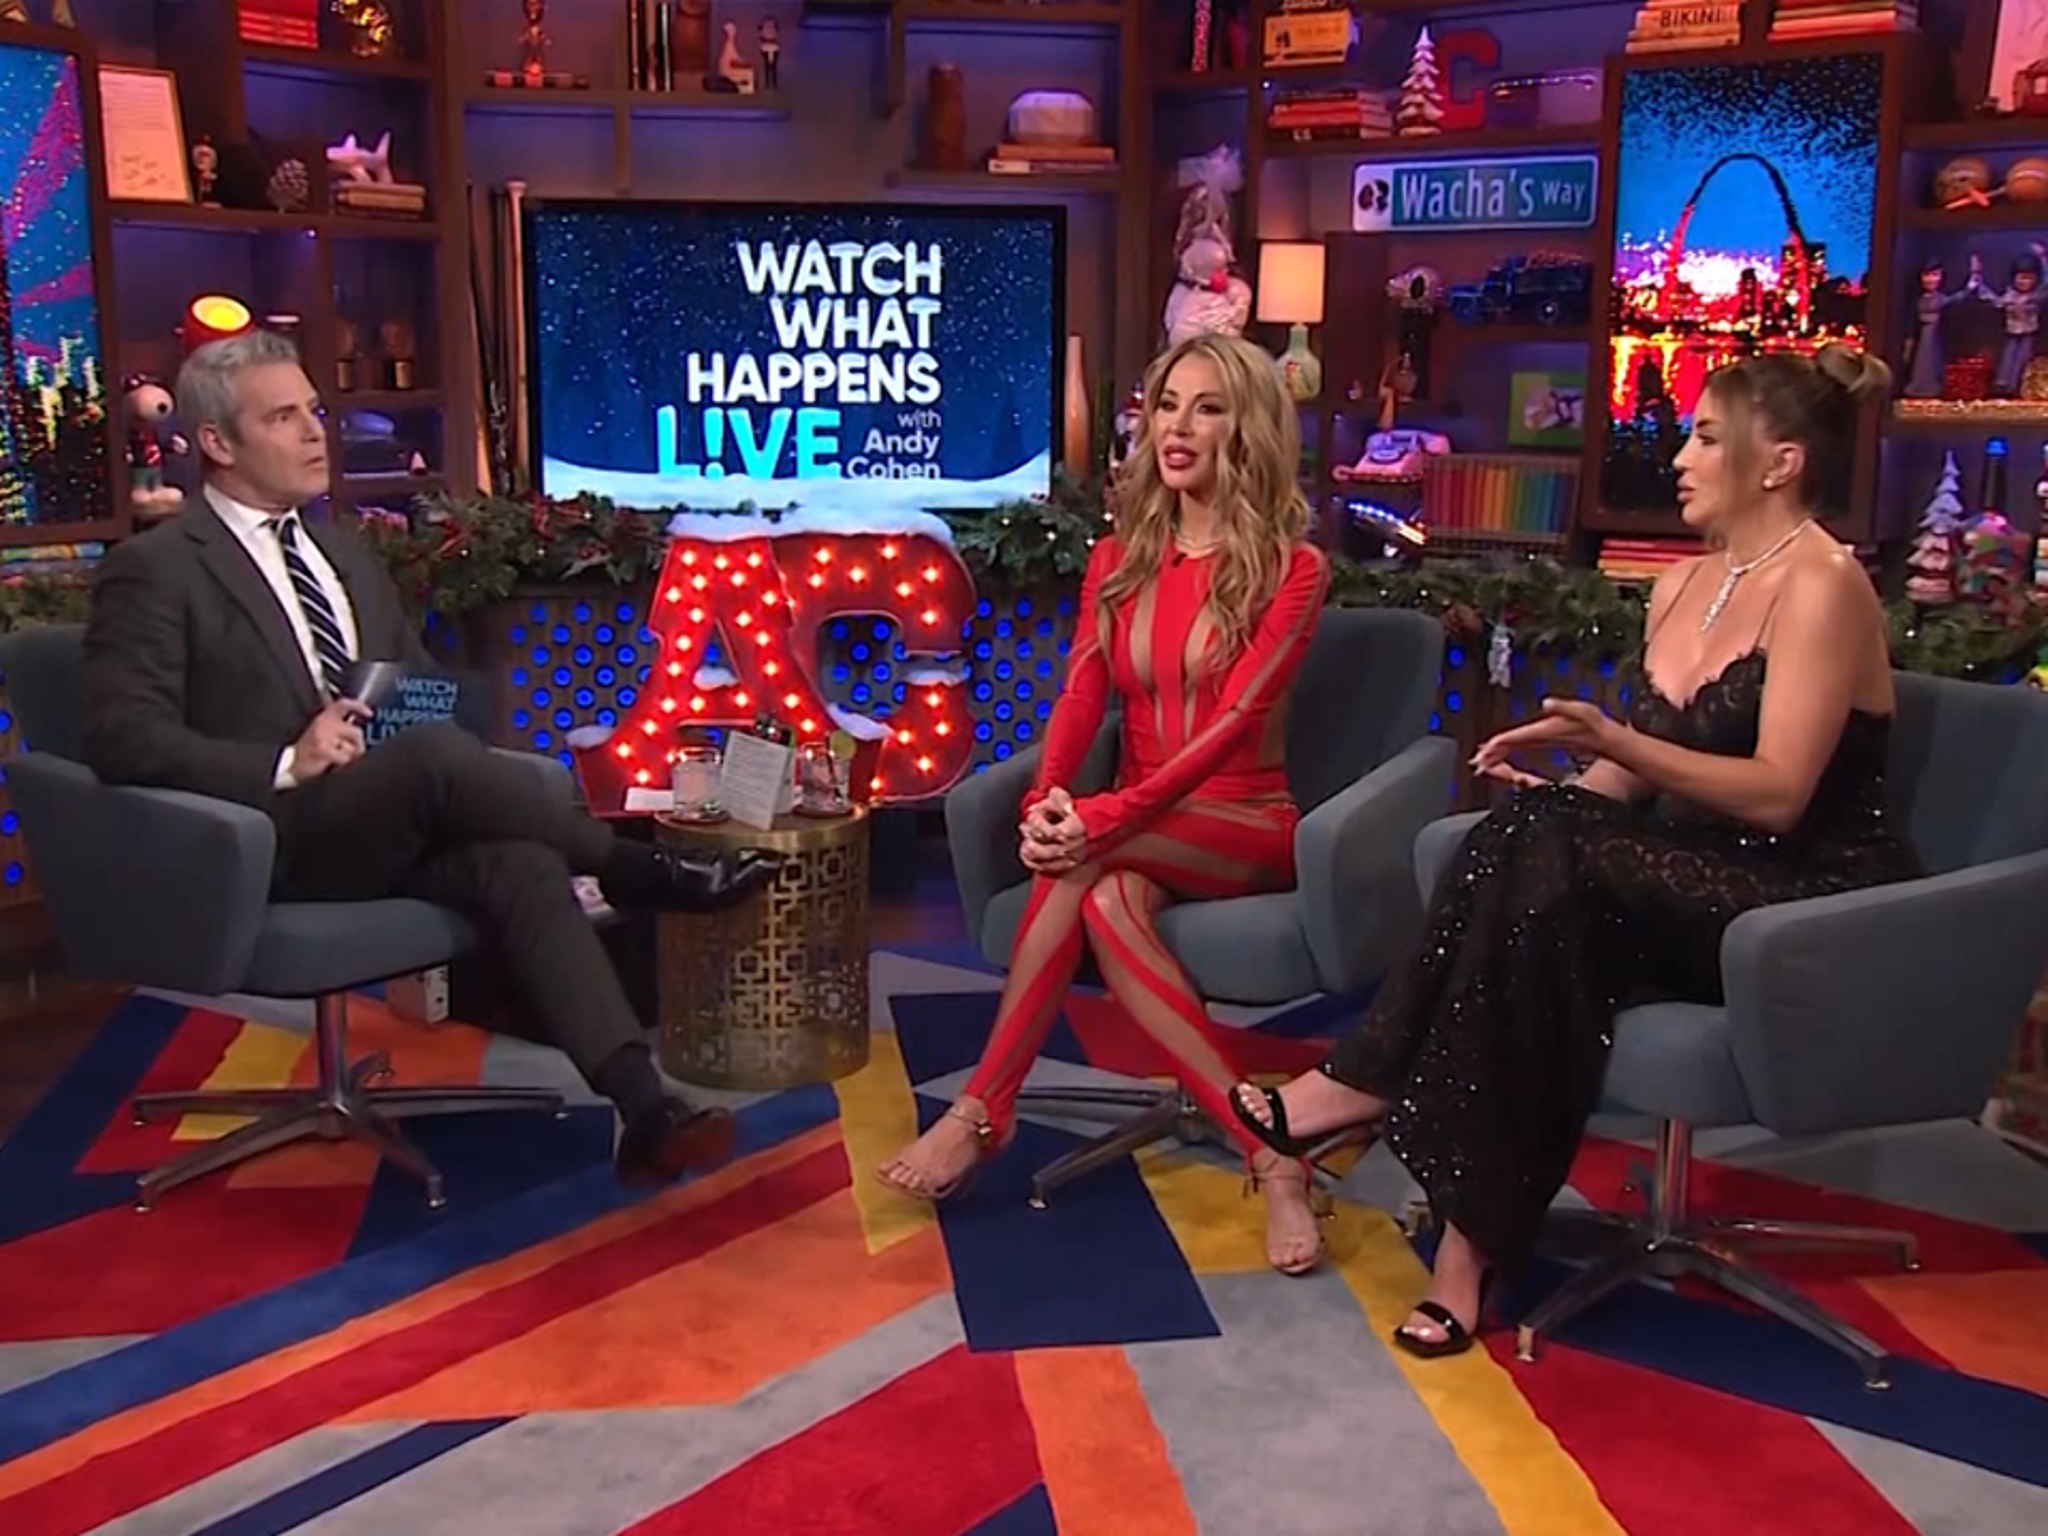 Larsa Pippen told Andy Cohen that she's just friends with Marcus Jordan